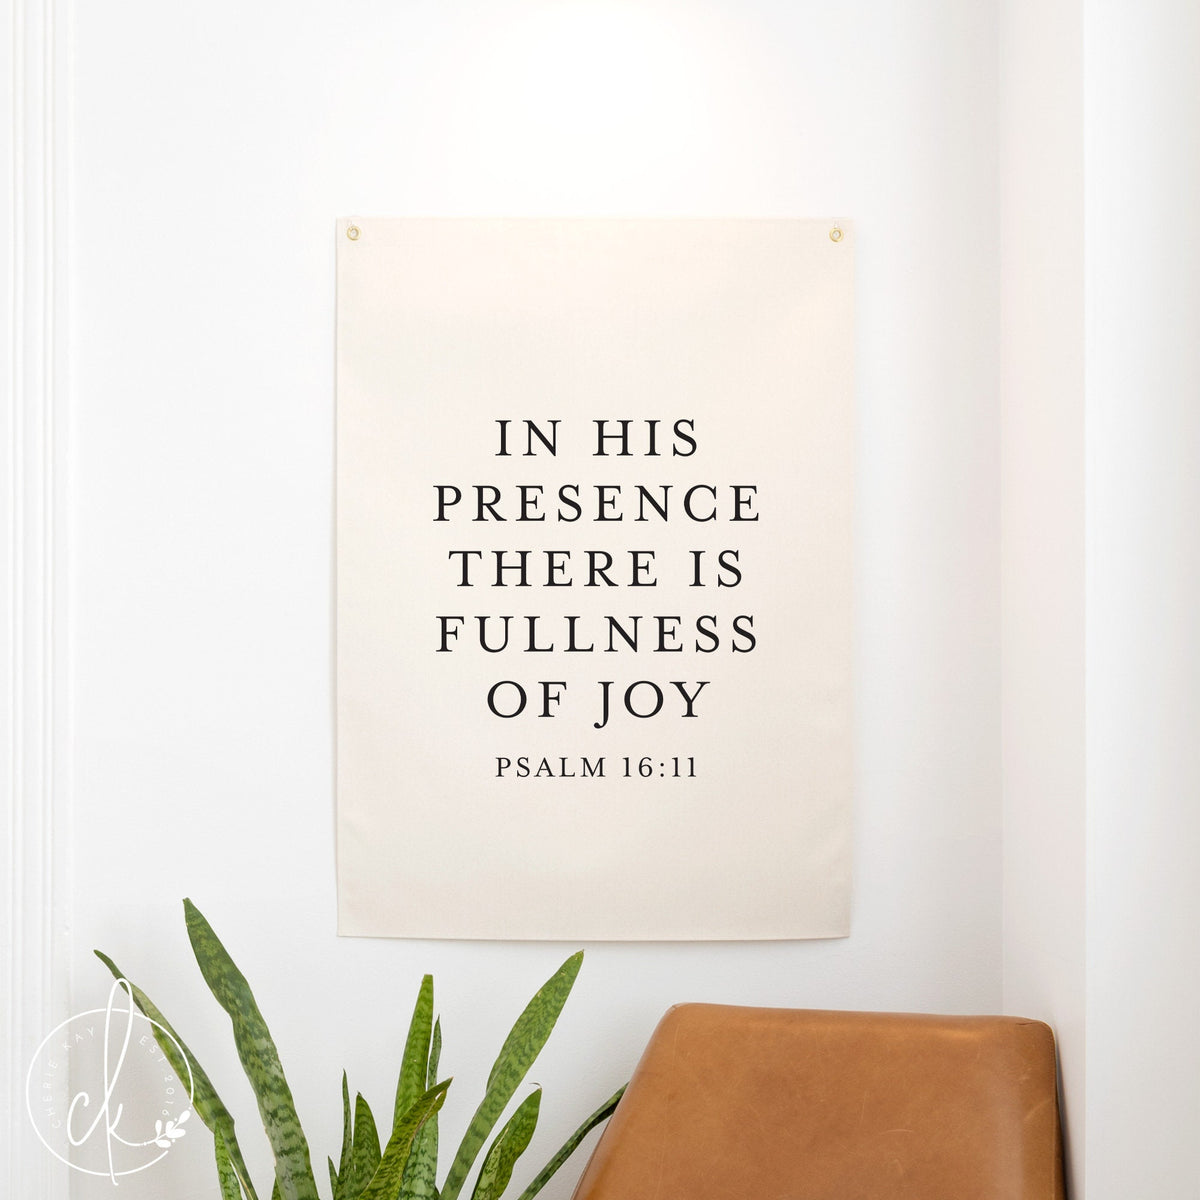 In His Presence There Is Fullness Of Joy | Canvas Flag | Scripture Wall Decor | Christian Home Decor | Psalm 16 11 | Bible Verse Decor